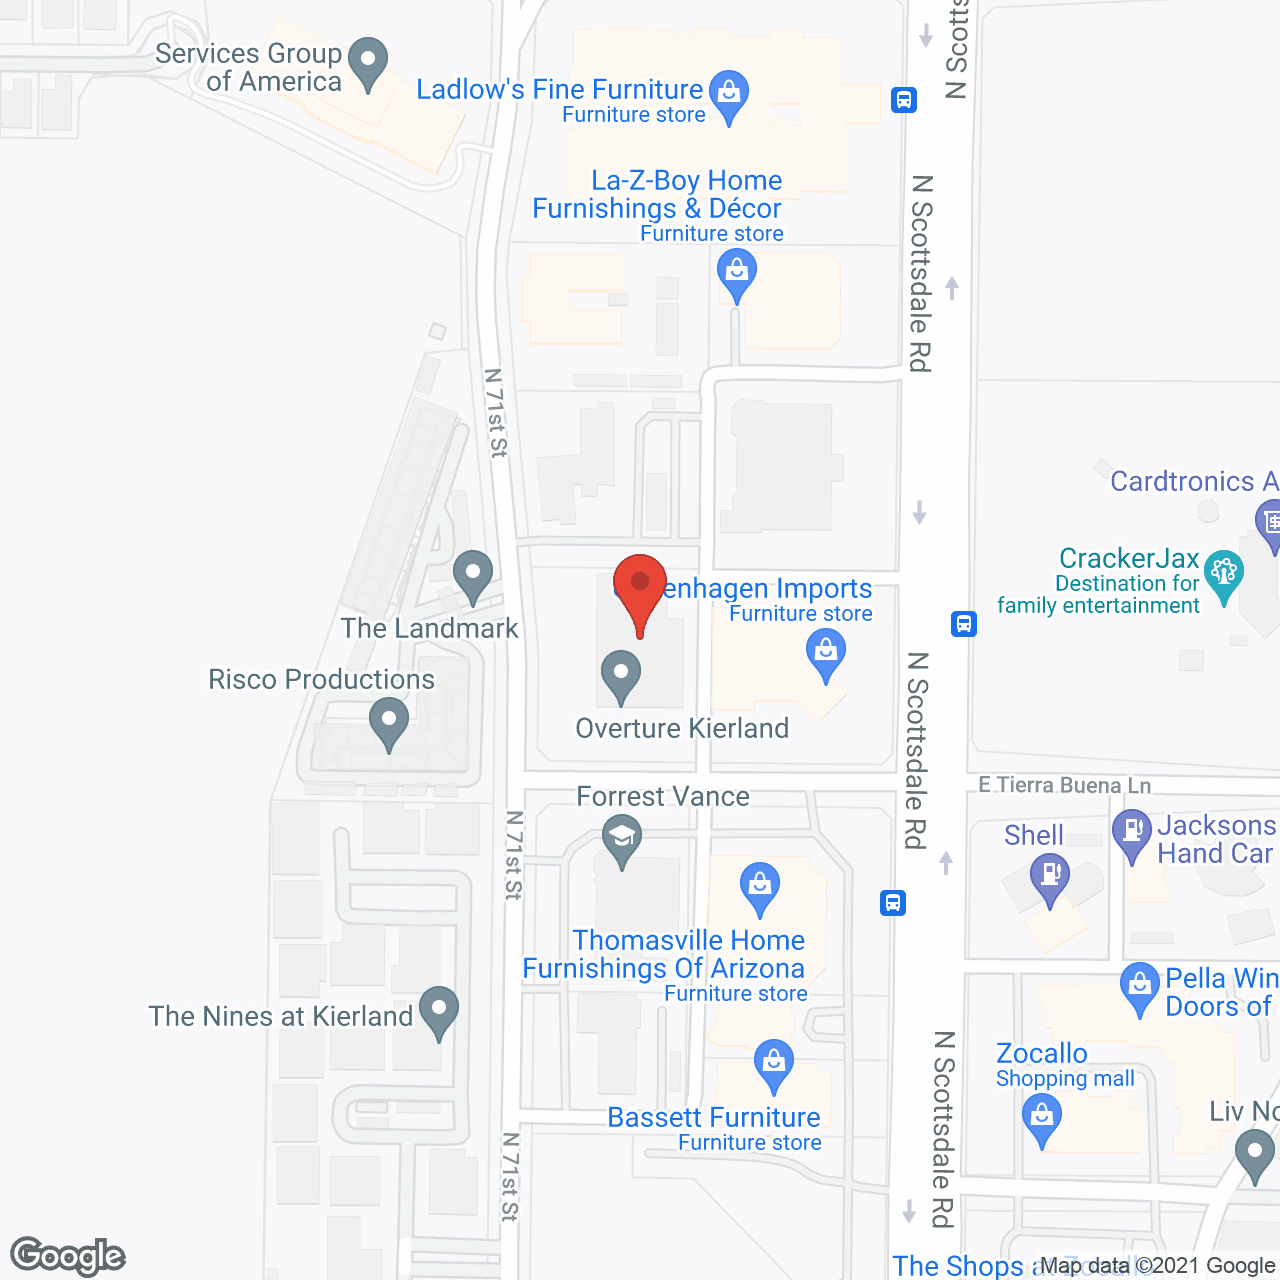 Overture Kierland 55+ Apartment Homes in google map